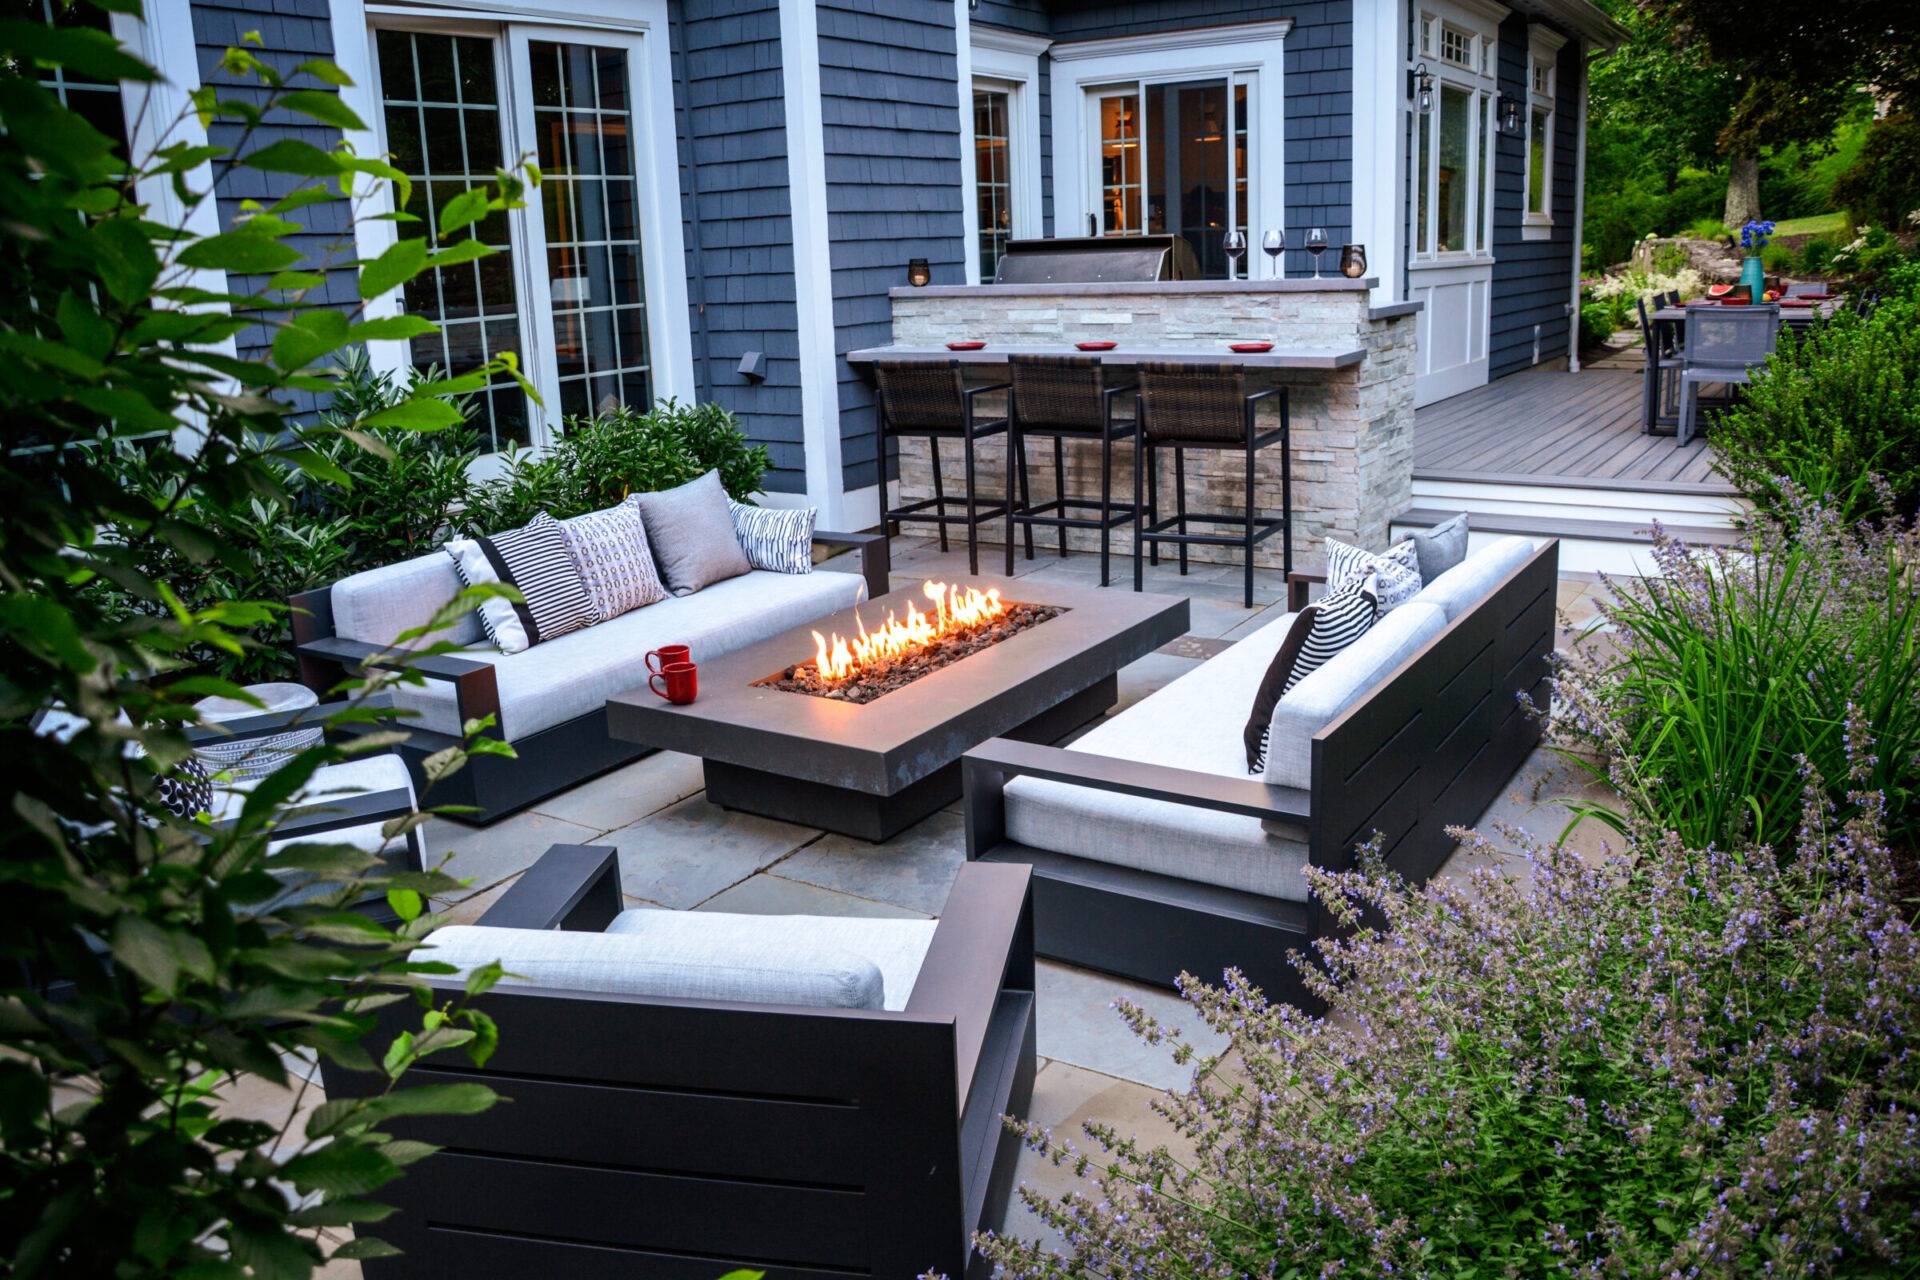 An outdoor living space with modern furniture, a fire pit, greenery, and a built-in grill bar against a backdrop of a blue-gray house.